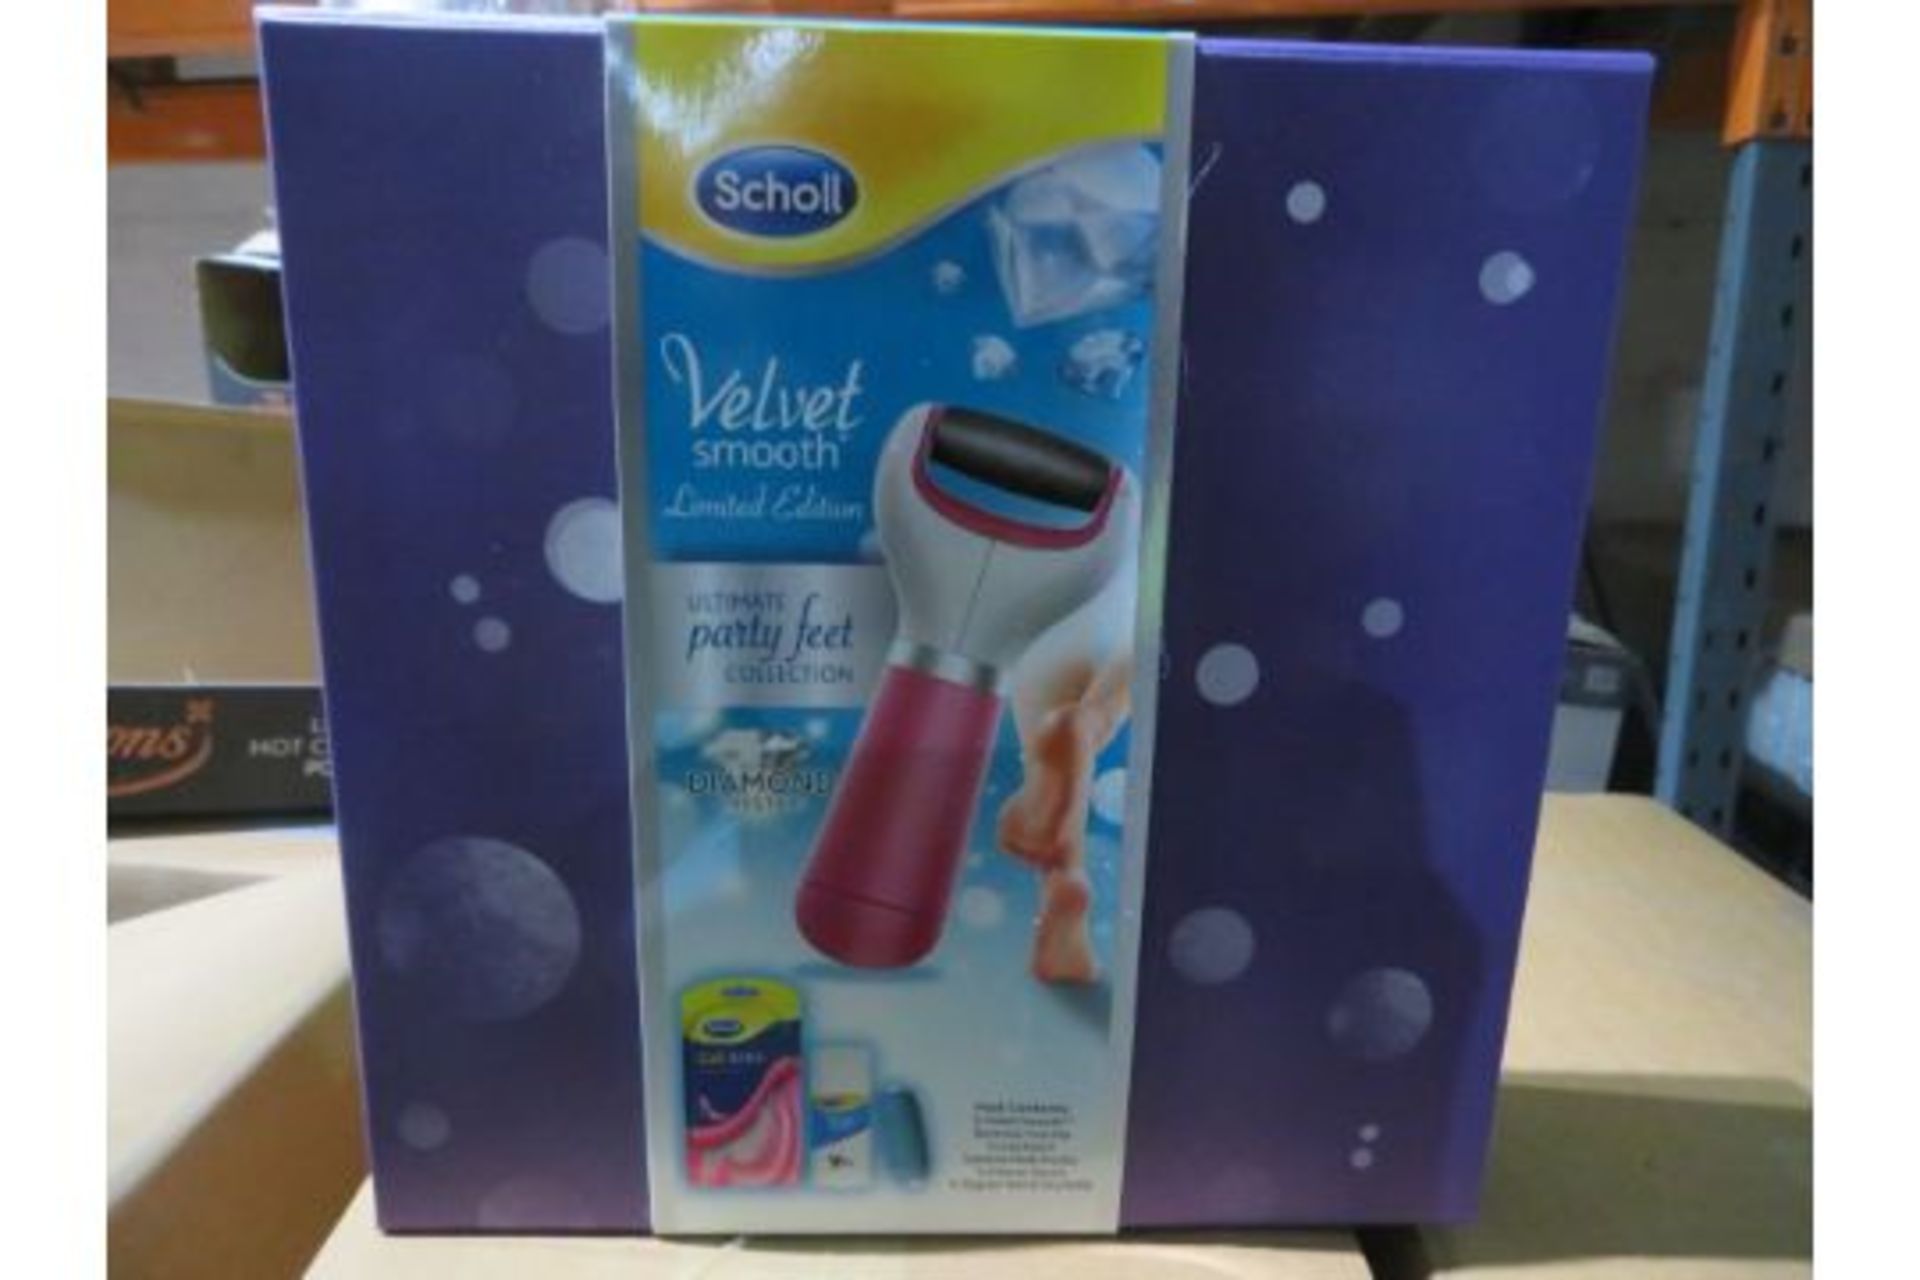 10 x SCHOLL VELVET SMOOTH LIMITED EDITION - ULTIMATE PARTY FEET COLLECTION WITH DIAMOND CRYSTALS